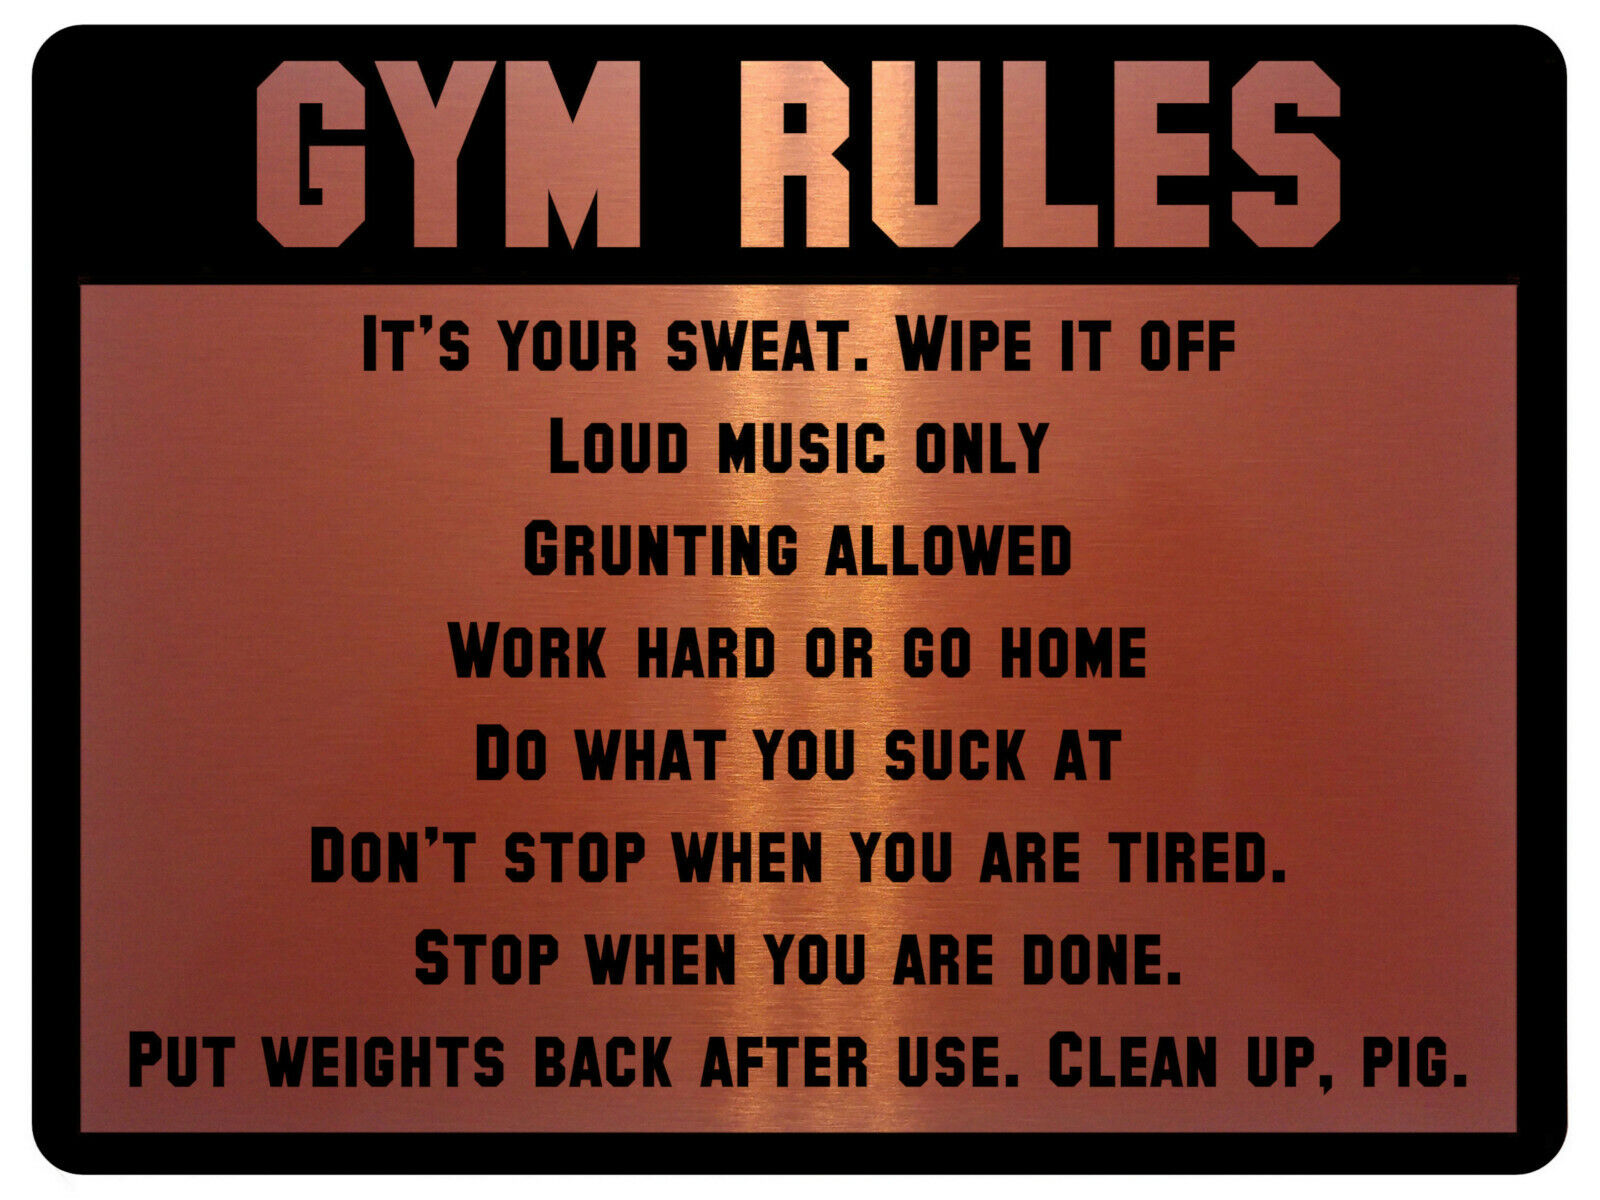 688 GYM RULES Safety Funny Door Wall Metal Aluminium Plaque Sign Fitness  Club | eBay